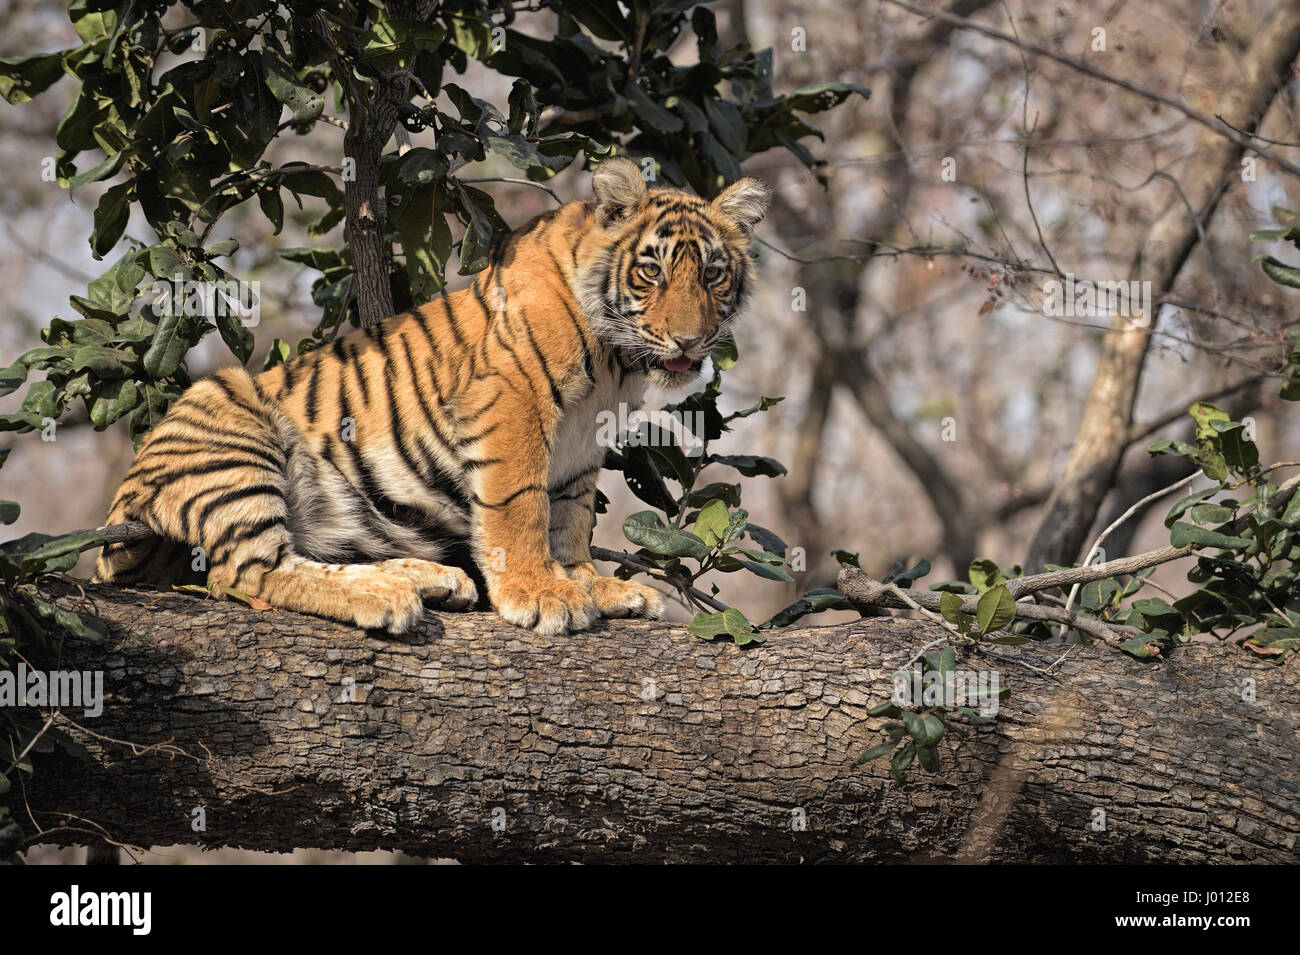 A wild tiger cub sitting on the trunk of a tree in Ranthambhore tiger reserve of India Stock Photo